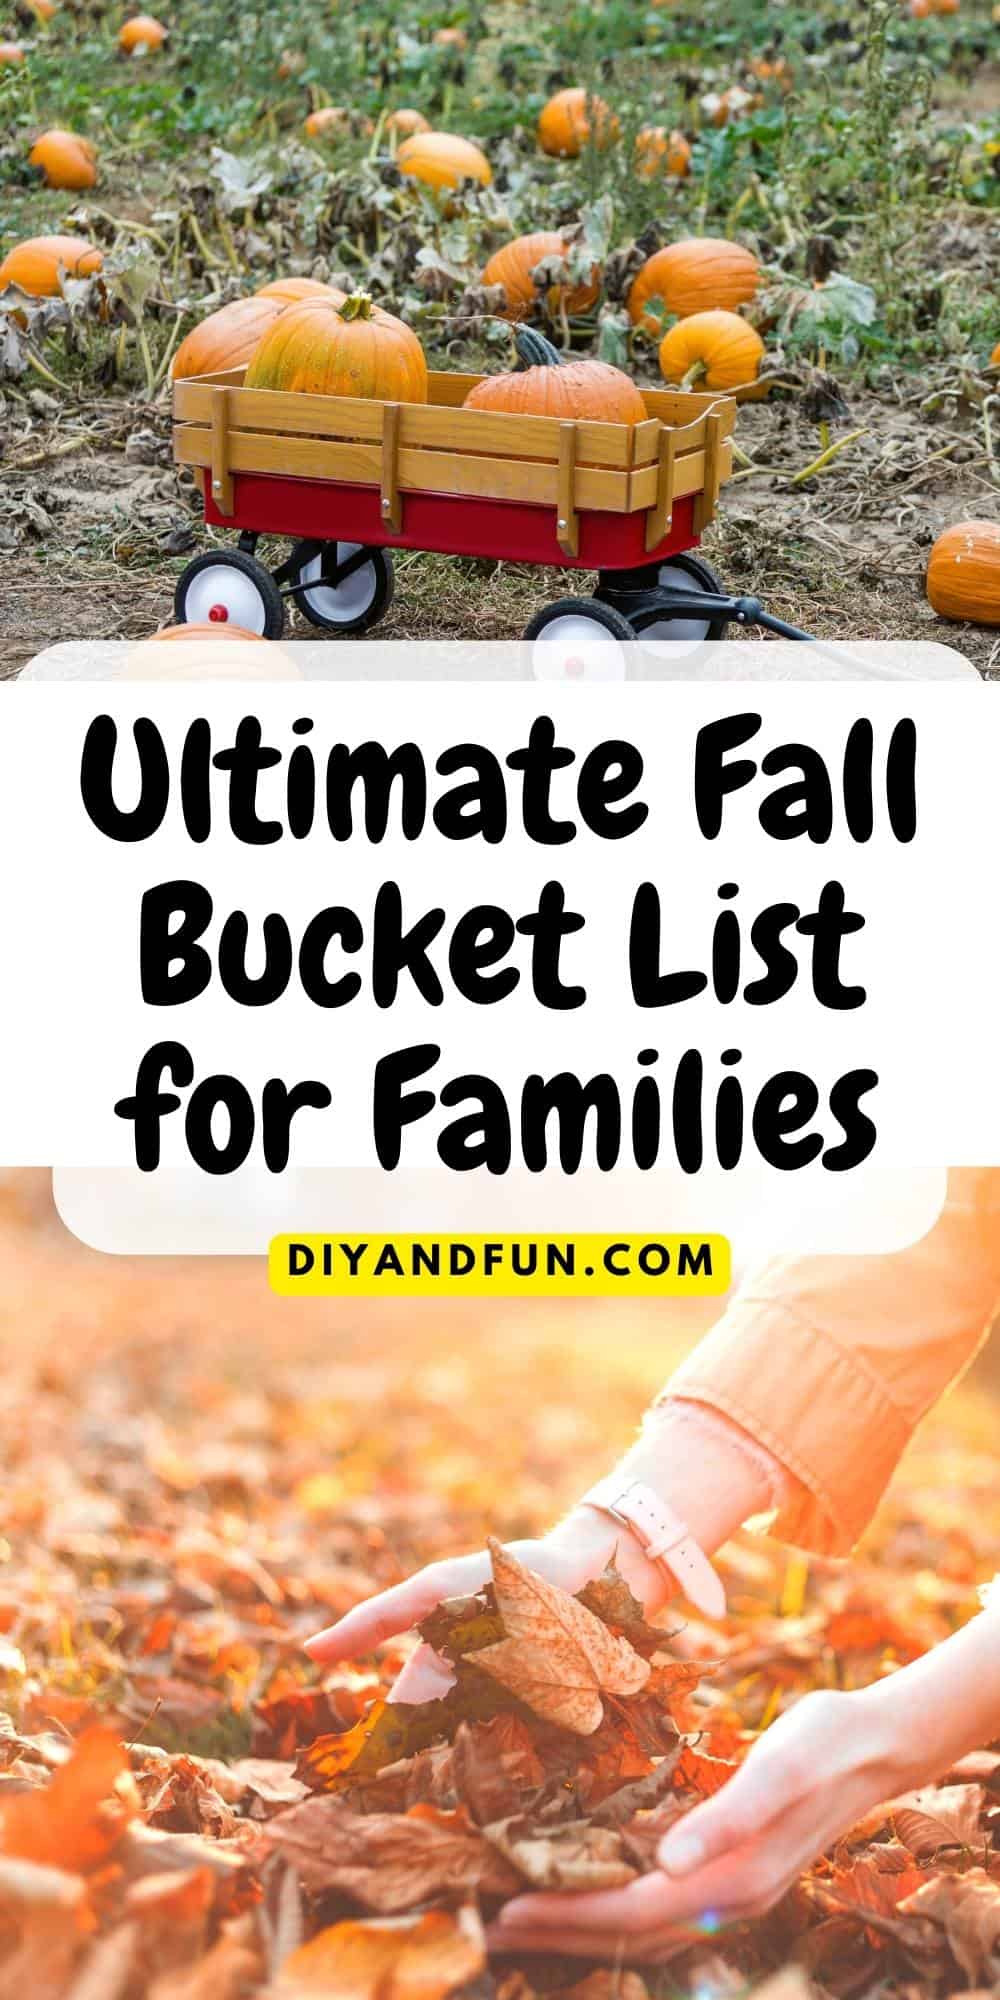 Ultimate Fall Bucket List for Families, a listing of over 50 fun and affordable family friendly ideas. Includes free downloads.